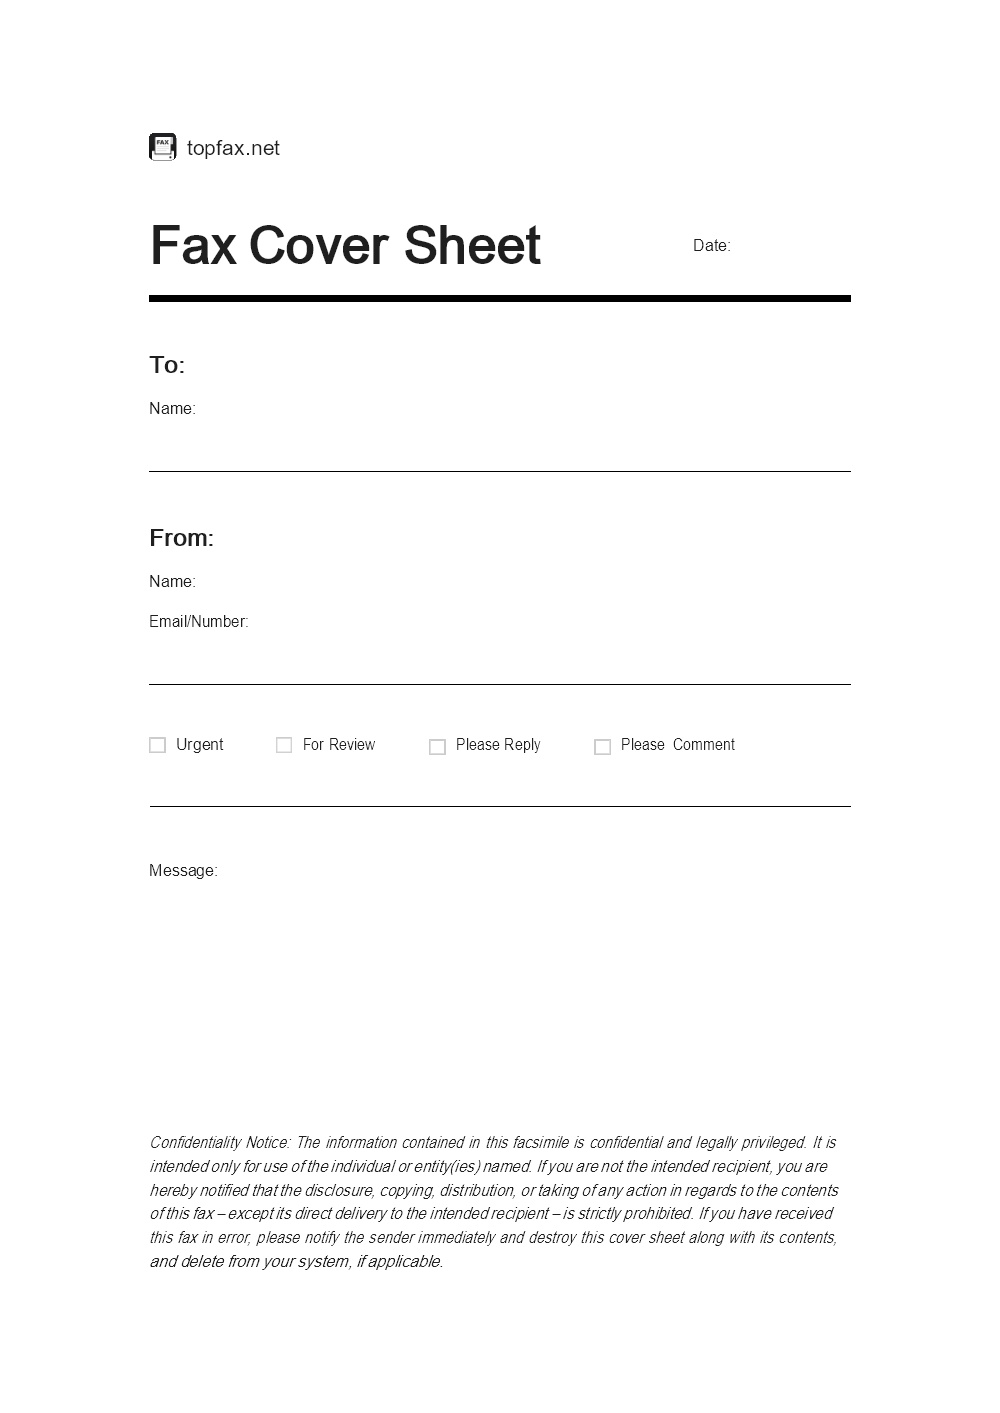 Fill Out a Fax Cover Sheet